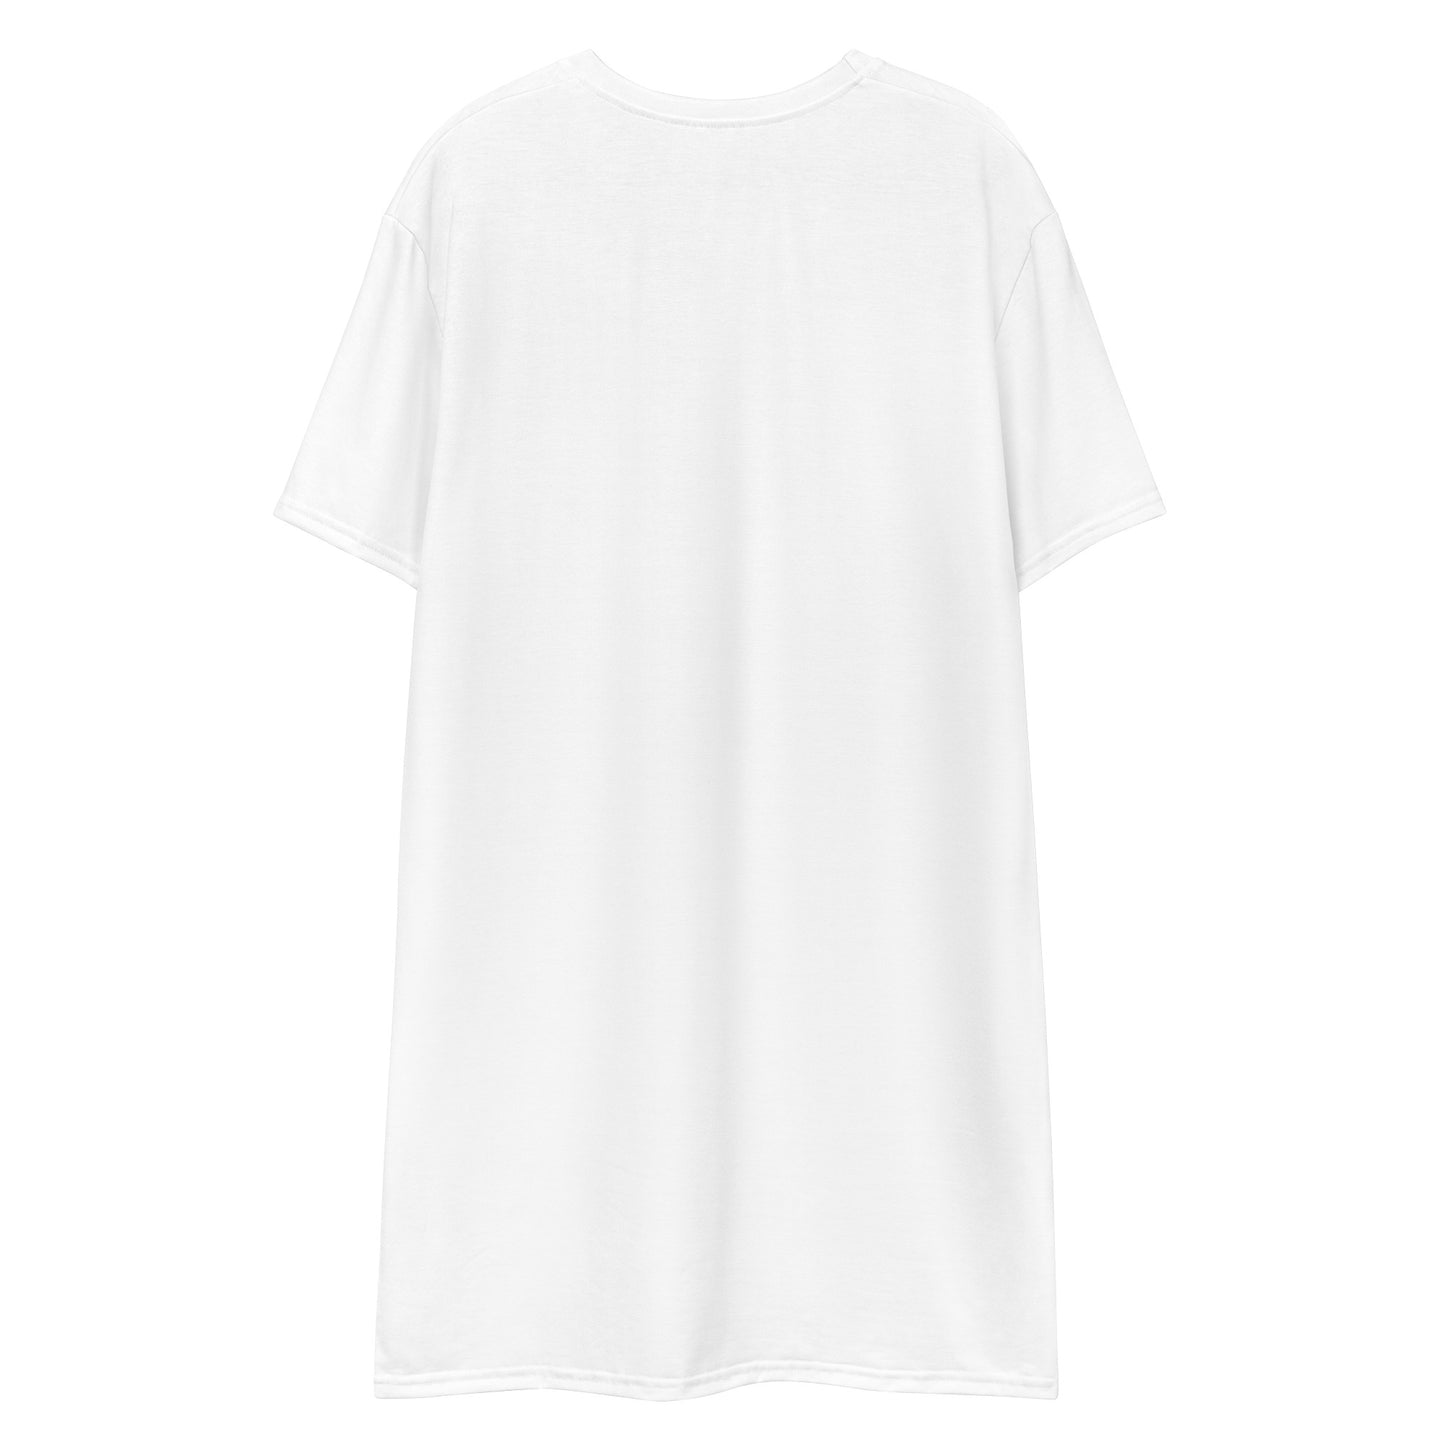 A lot going on at the moment | Basic White - Inspired By Taylor Swift - Sustainably Made T-shirt dress